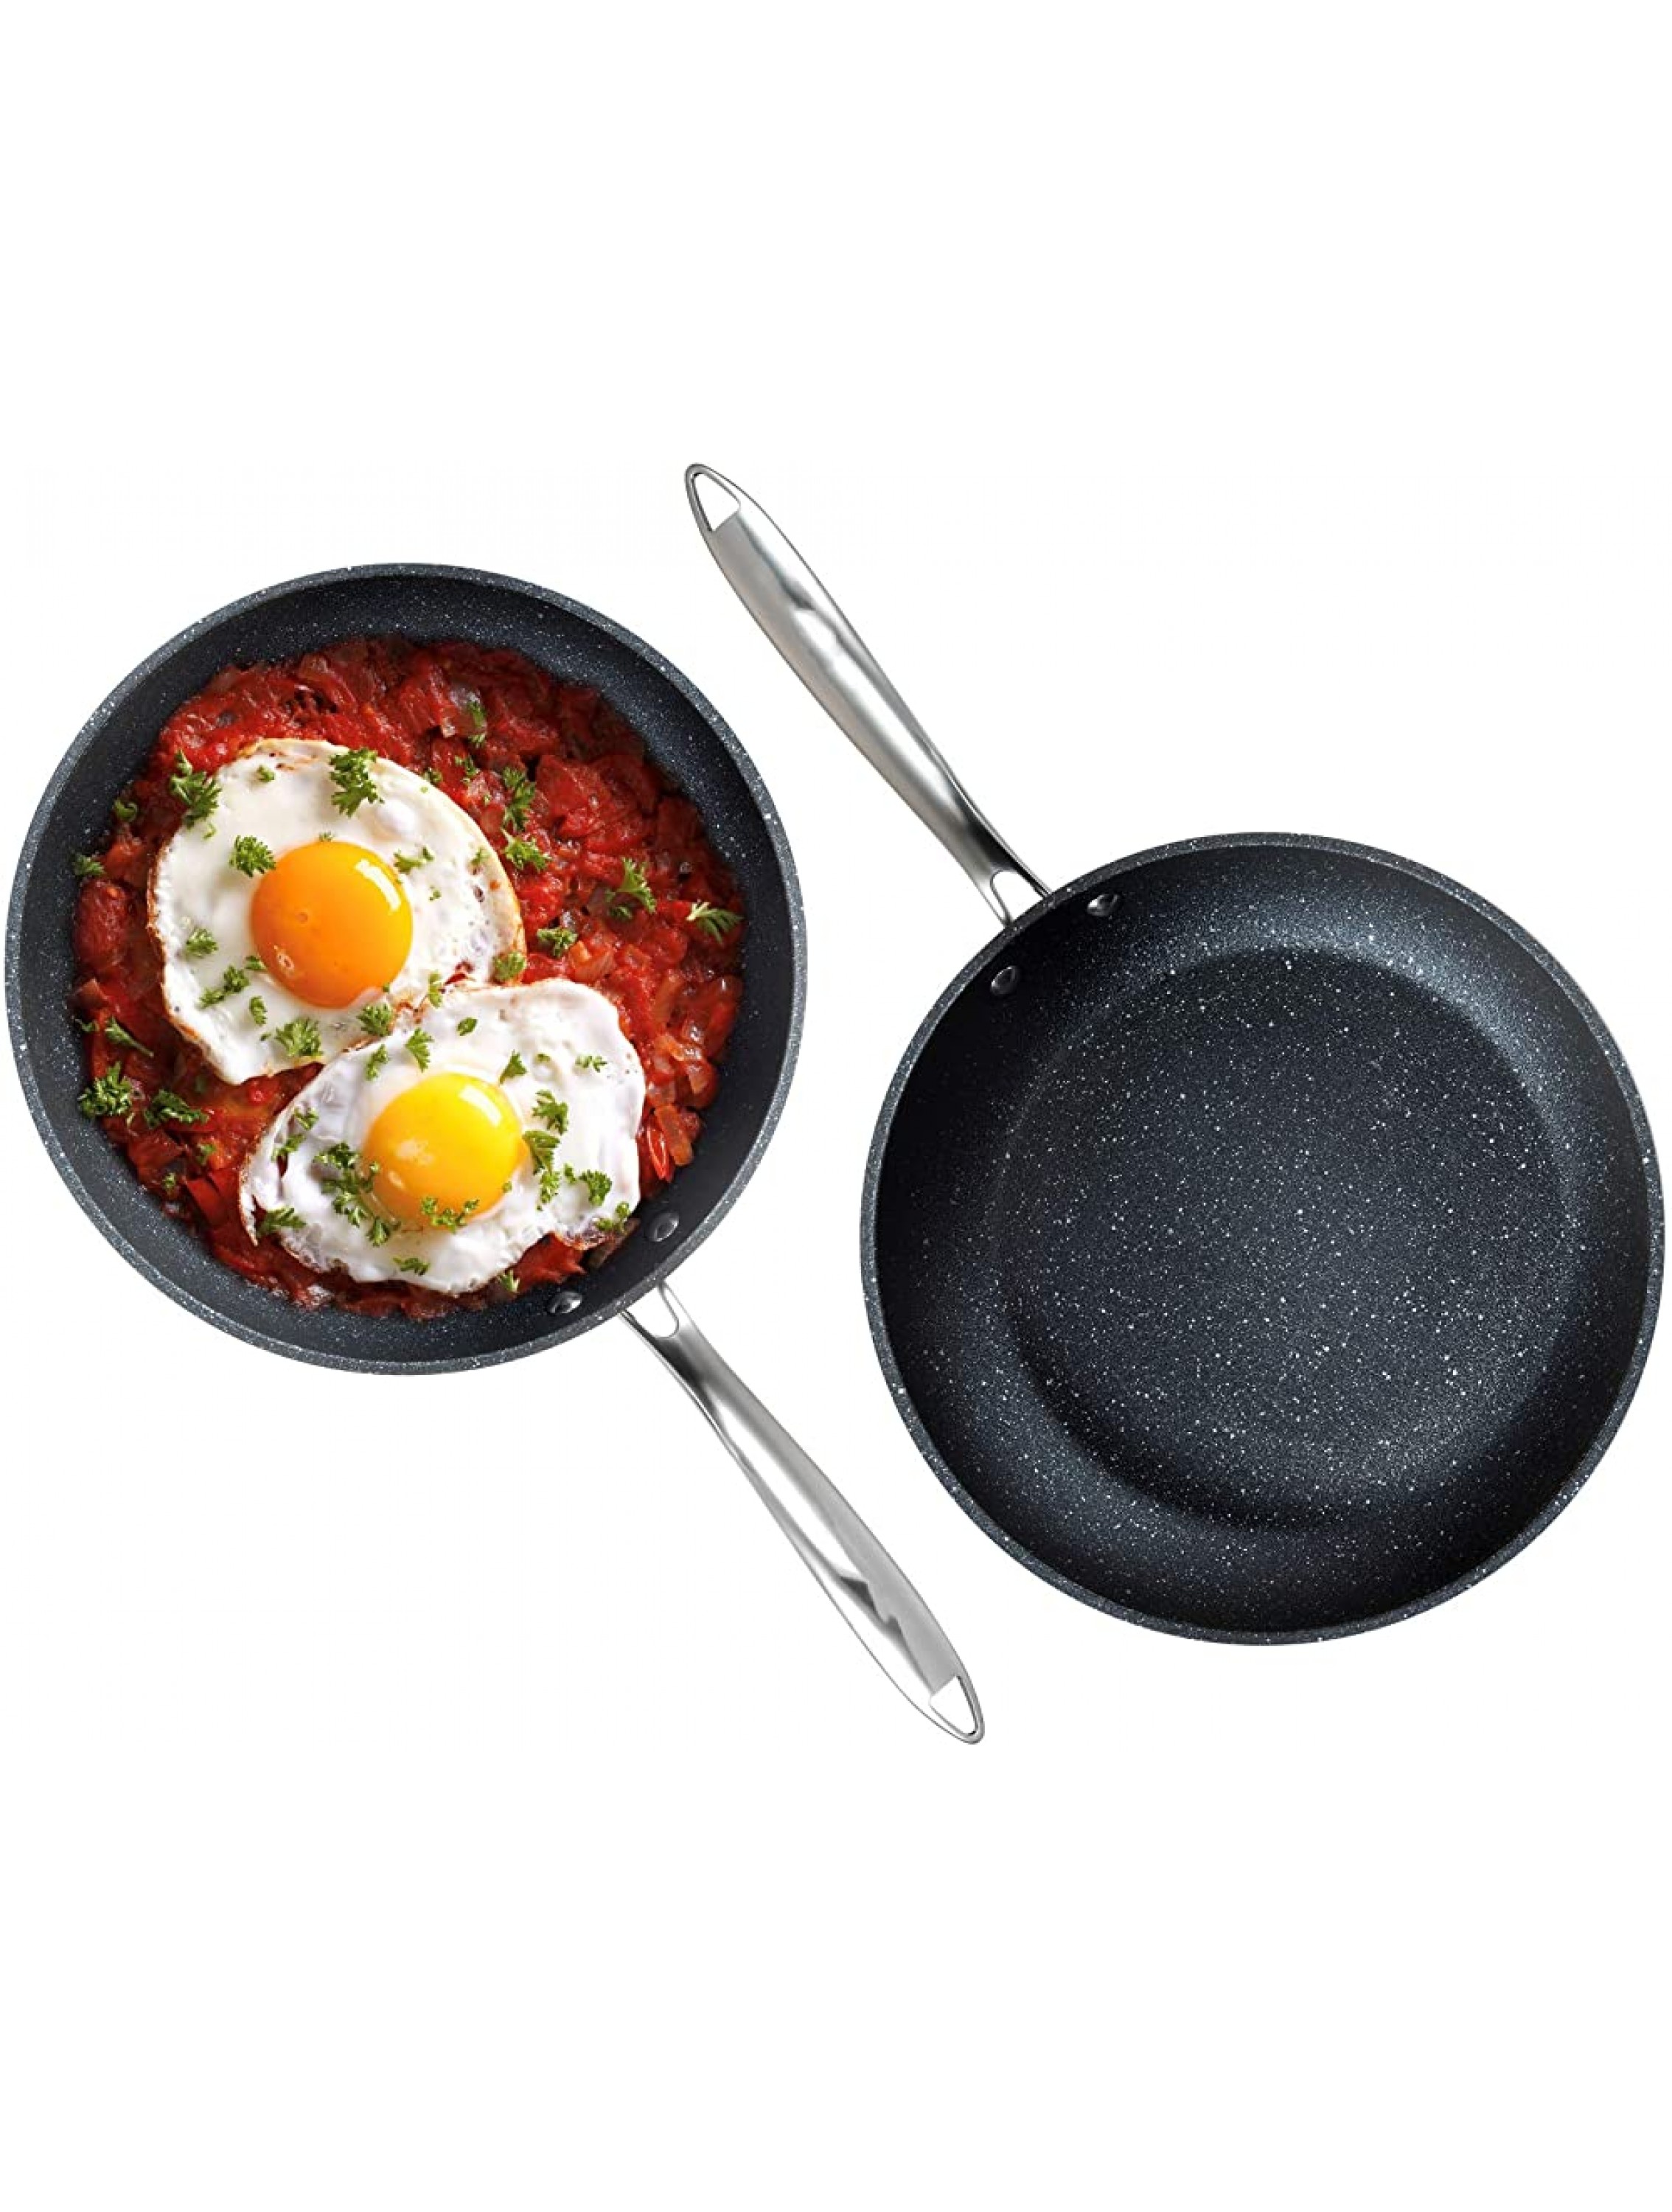 Granite Stone Professional Frying Pan Set Hard Anodized Ultra Nonstick 10” & 11.5” Pro Chef’s Skillet Set Durable Granite Surface Coated 3x and Infused with Minerals & Diamonds Induction Capable… - BYCJ9X4DV